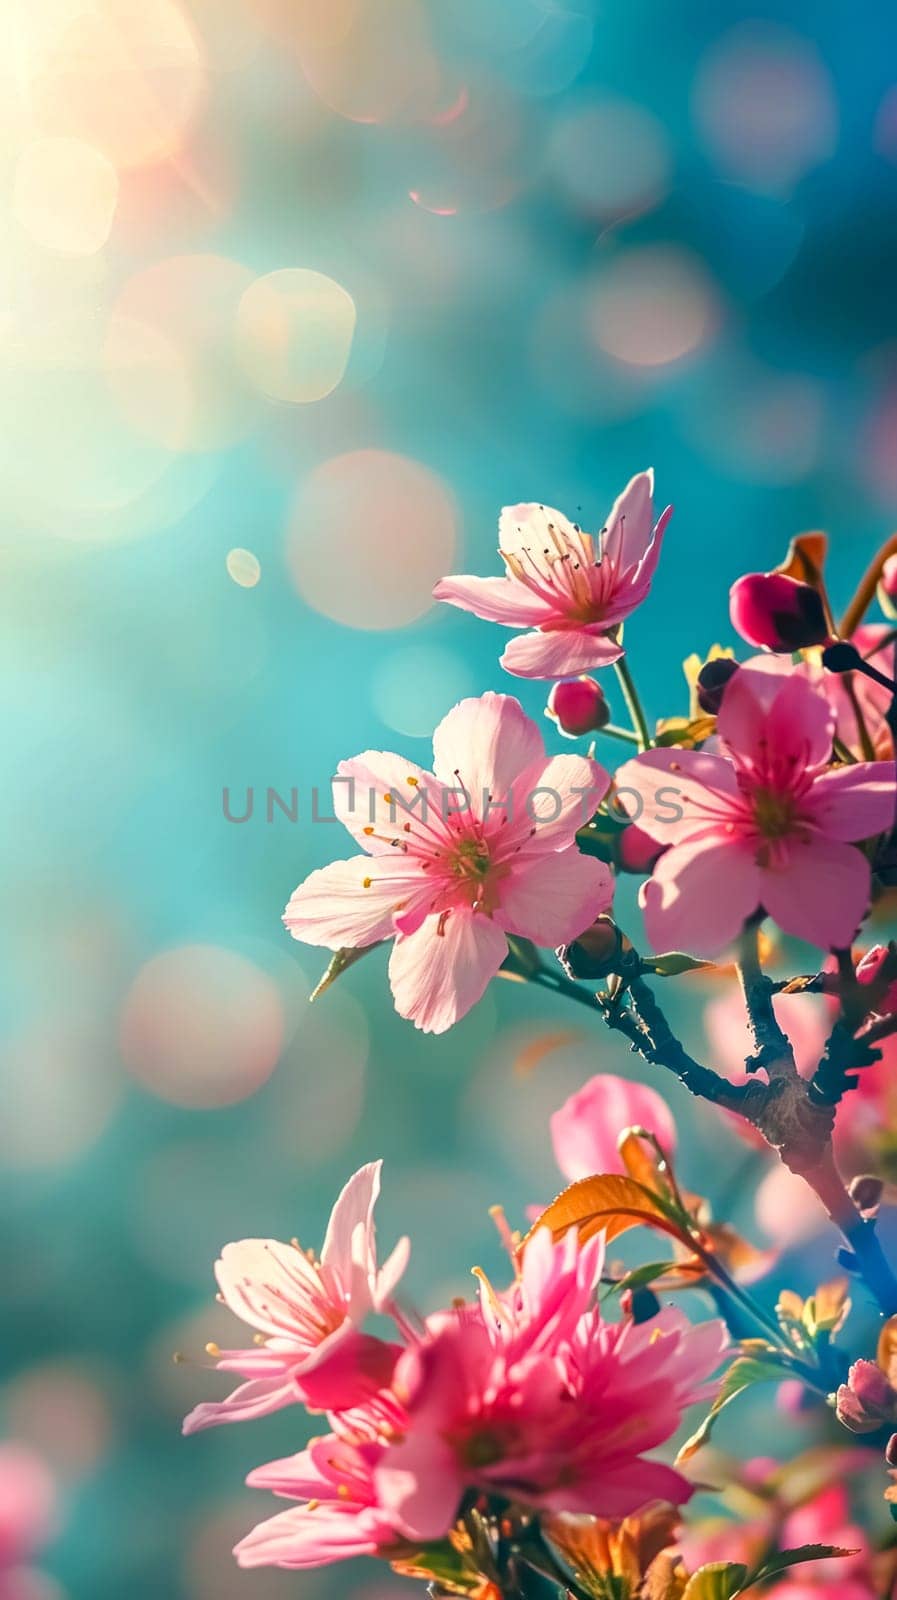 delicate pink cherry blossoms in bloom, with a soft, blurred blue background, conveying the gentle beauty of spring in a minimalist style. vertical, copy space